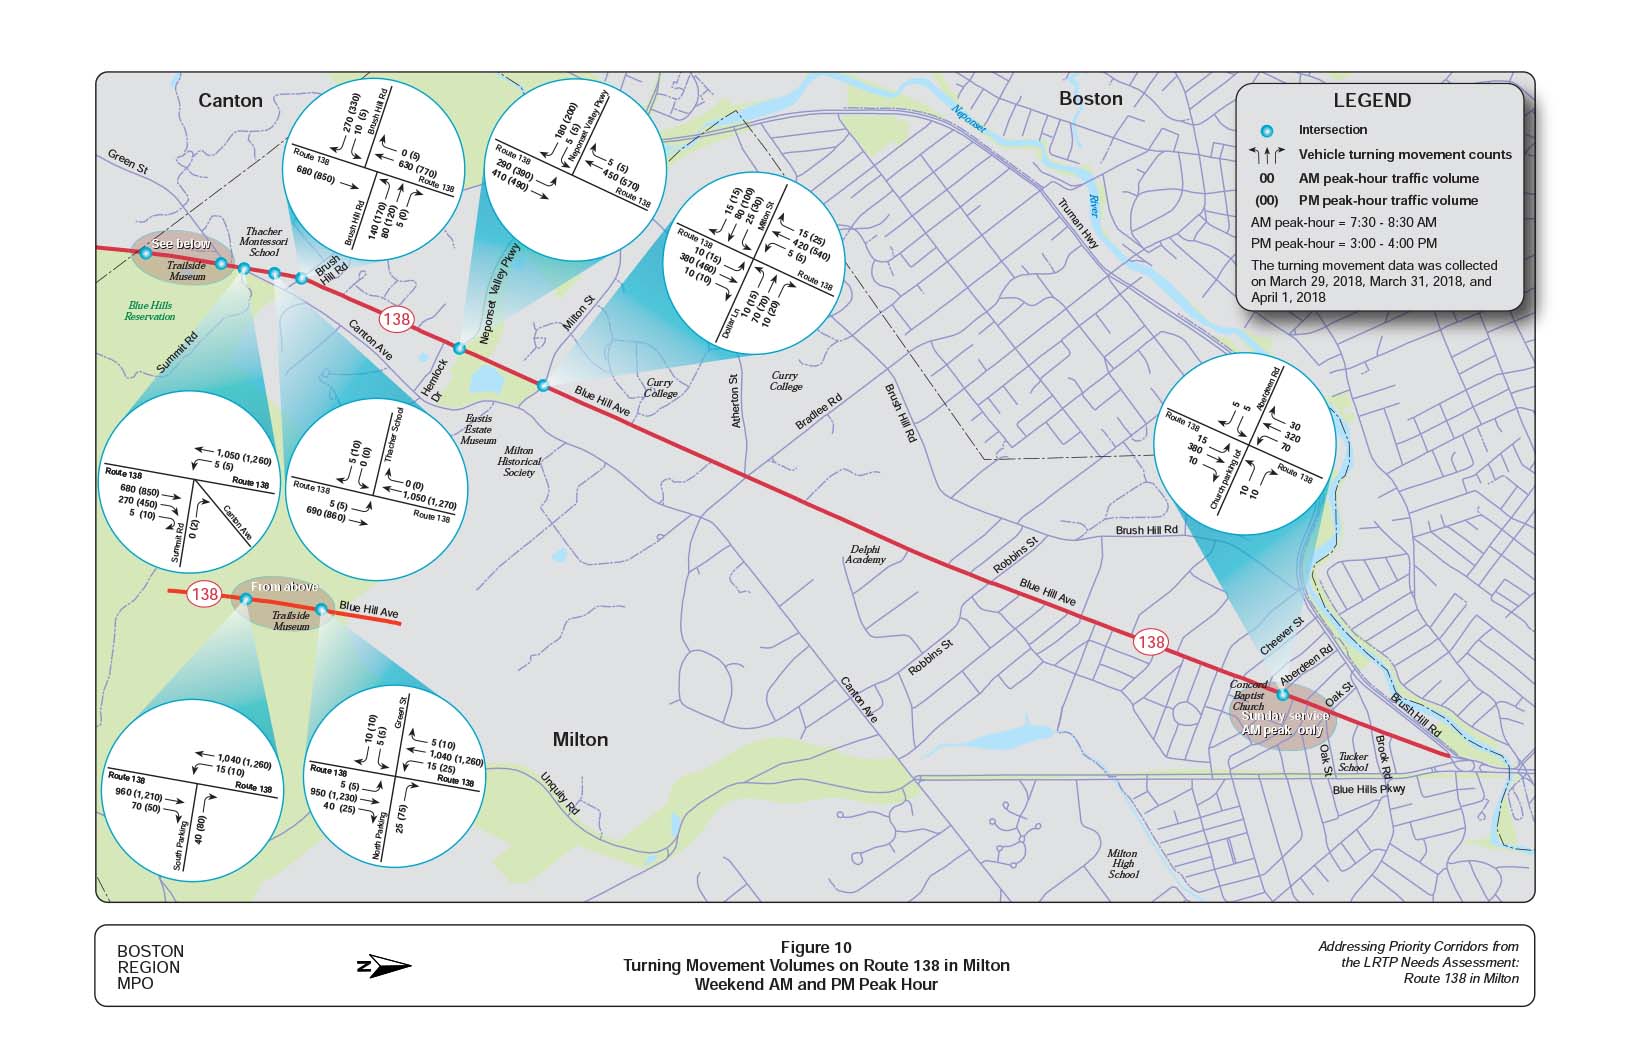 Figure 10 is a map of the study area showing the turning movement volumes during weekend AM and PM peak hours on Route 138 in Milton.